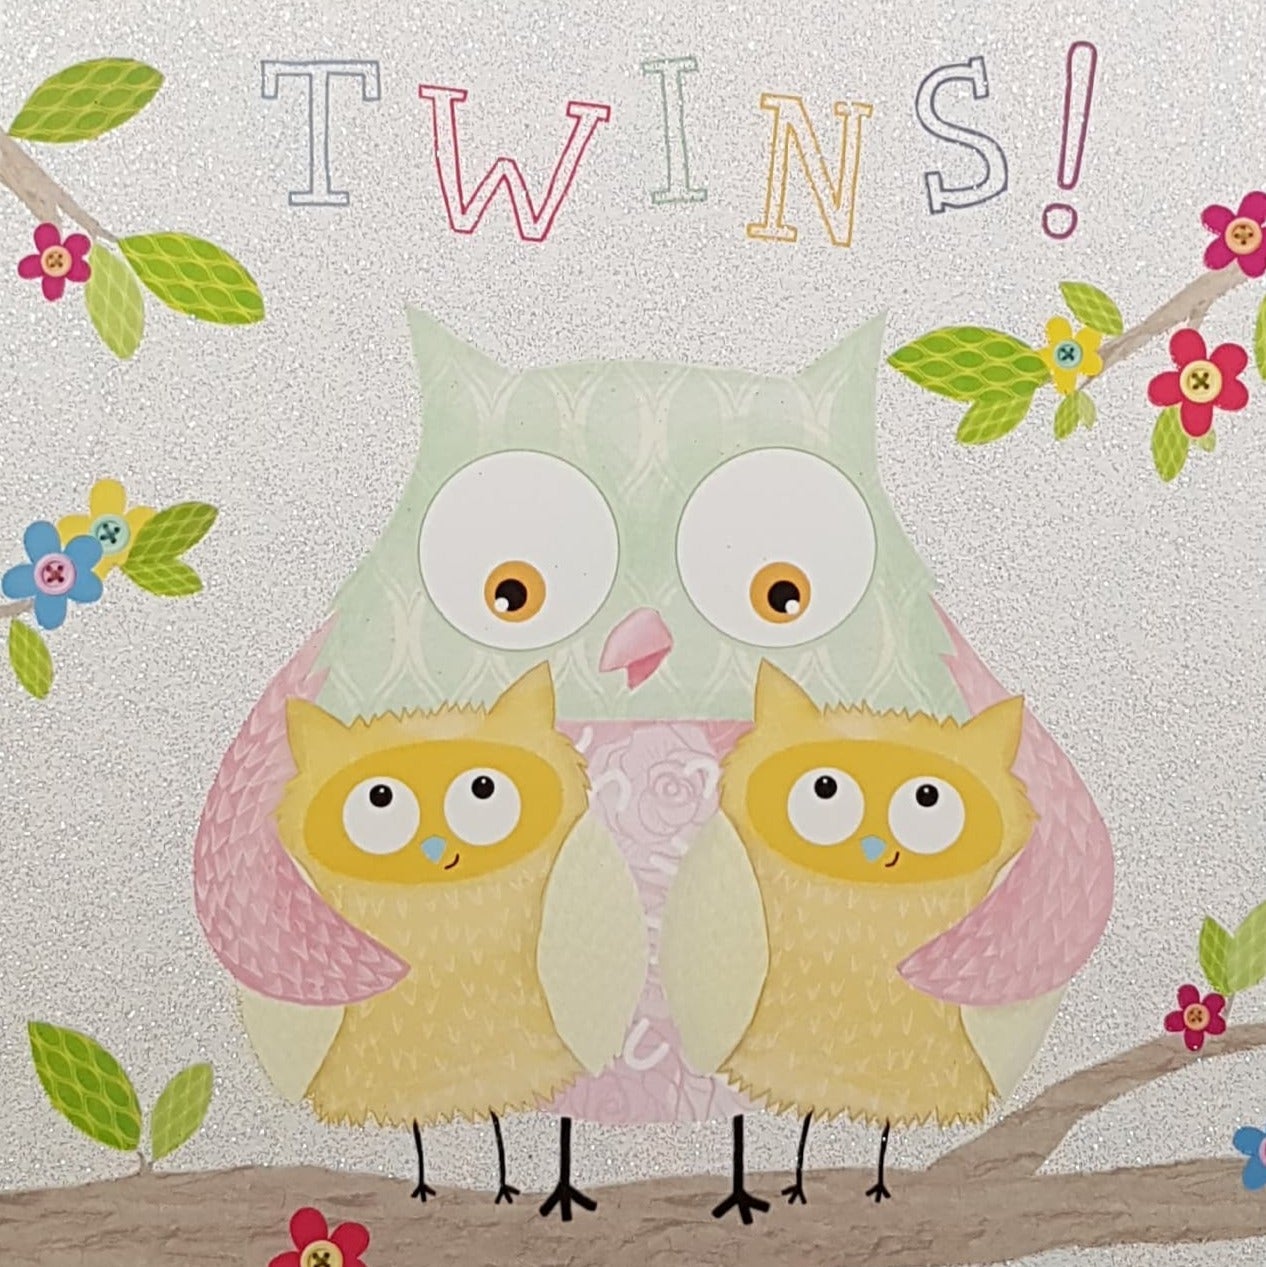 New Baby Card - New Twins / Mother Owl Holding Two Babies